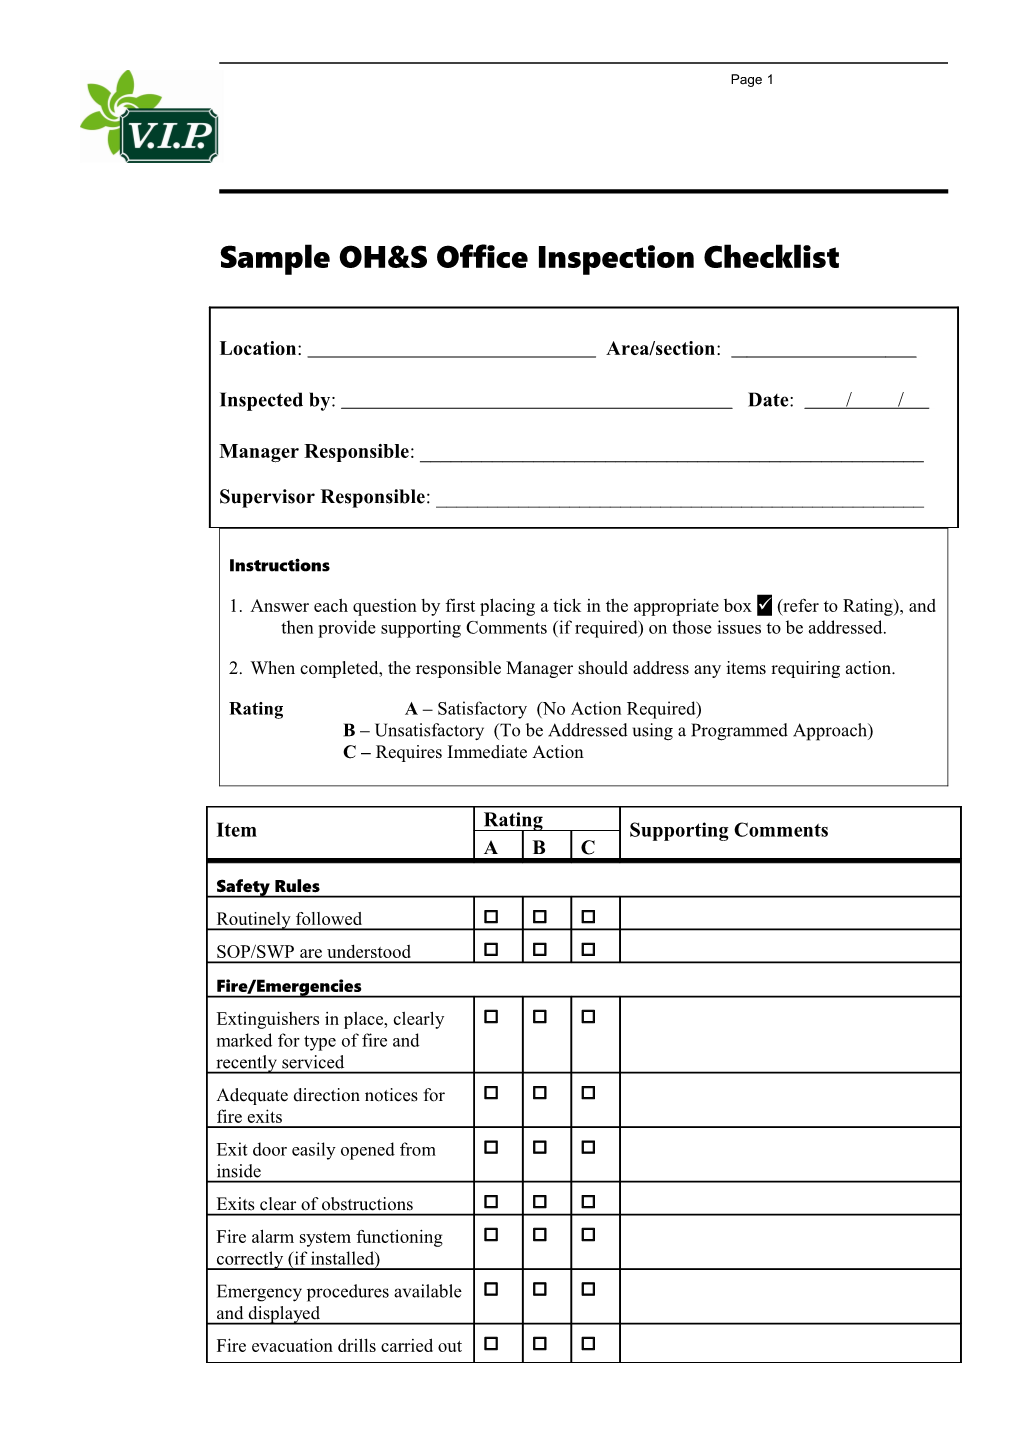 Sample OH&S Inspection Checklist